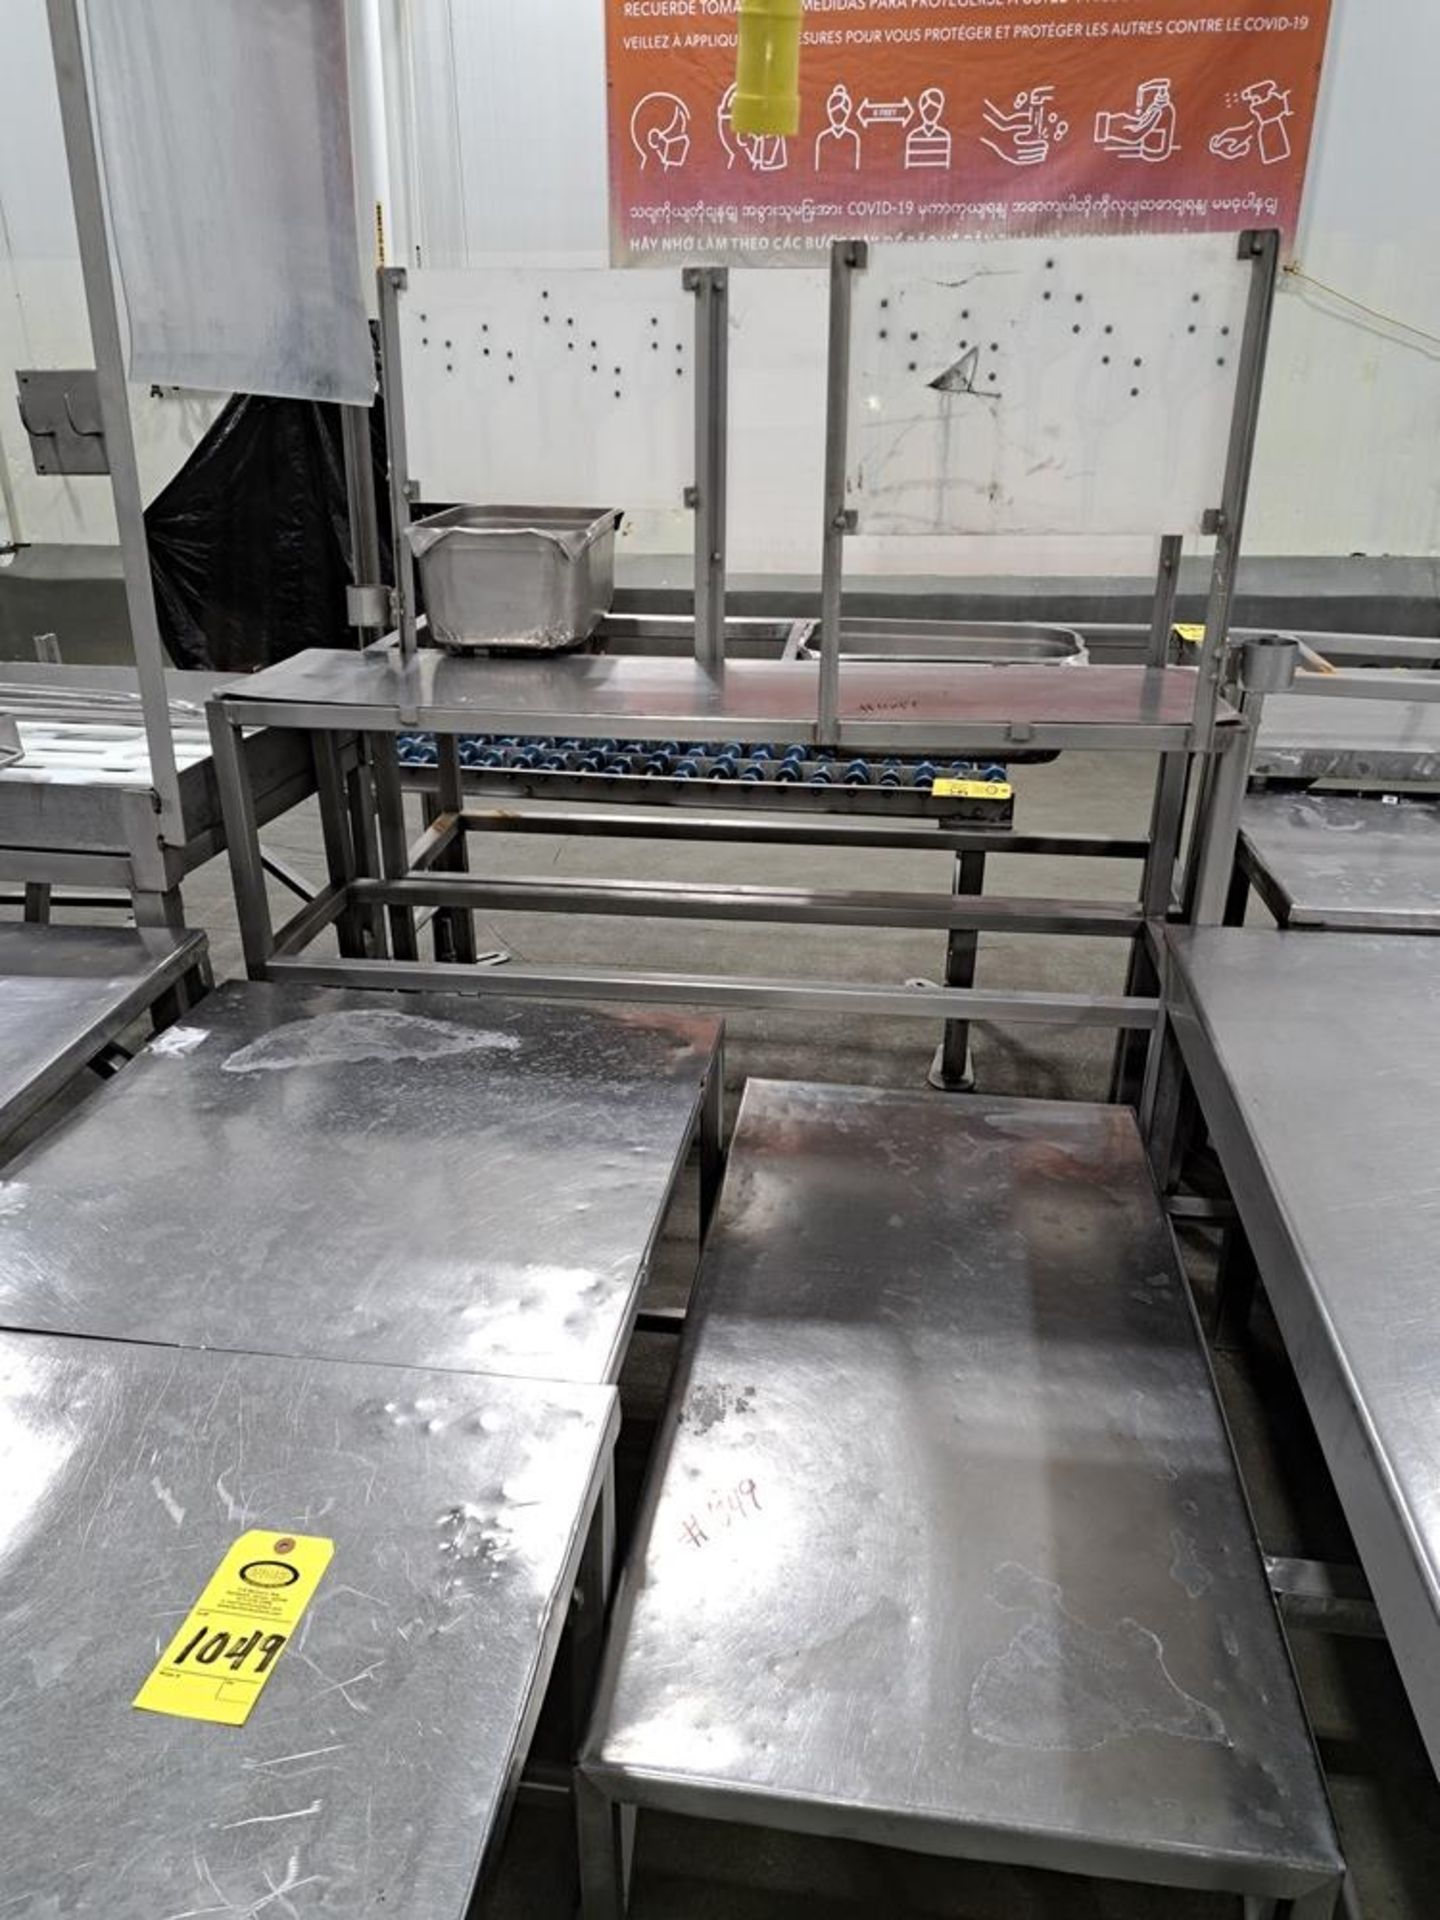 Lot (10) Stainless Steel Tables, Bag Holder, Stainless Steel Parts Cart: Required Loading Fee $250. - Image 5 of 5